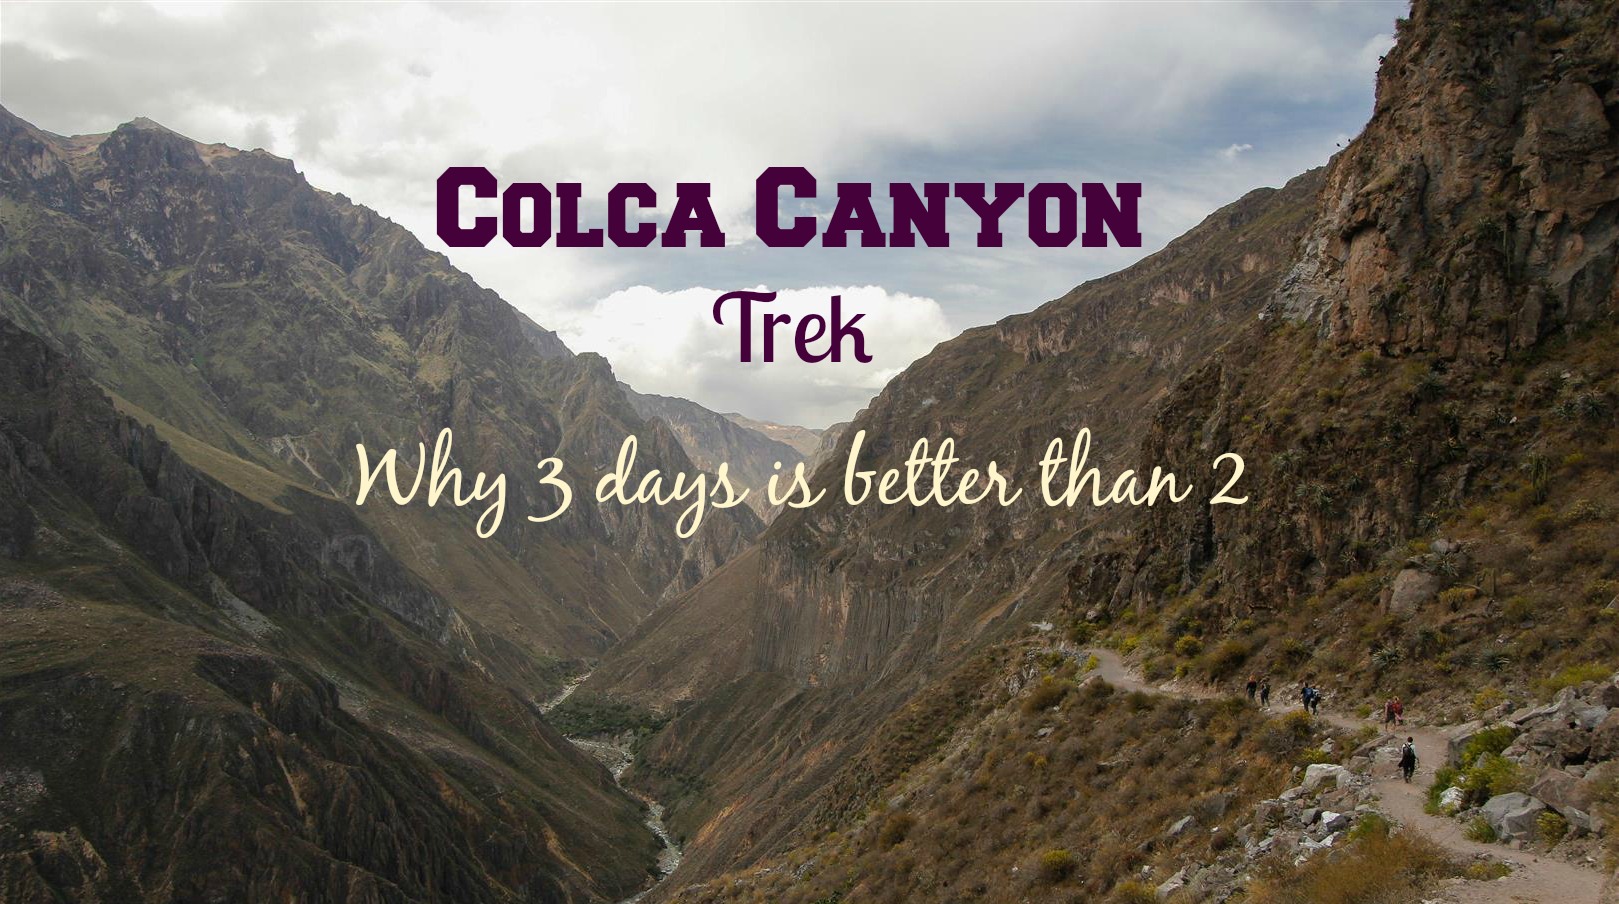 Colca Canyon Trek – Why 3 days is better than 2